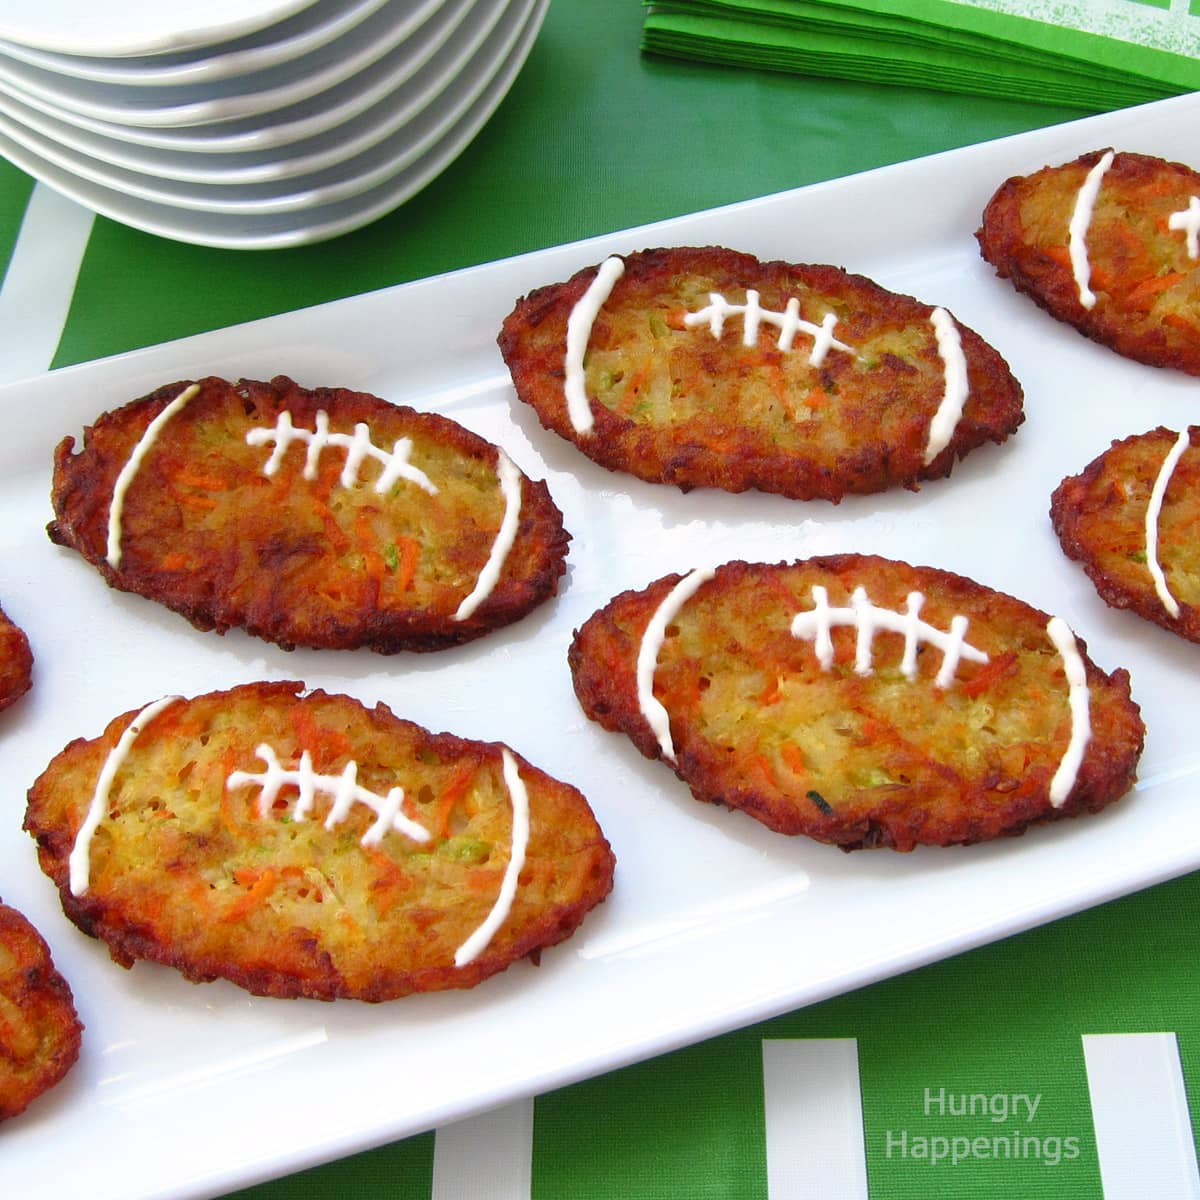 zucchini fritter footballs filled with carrots, potatoes, and zucchini.